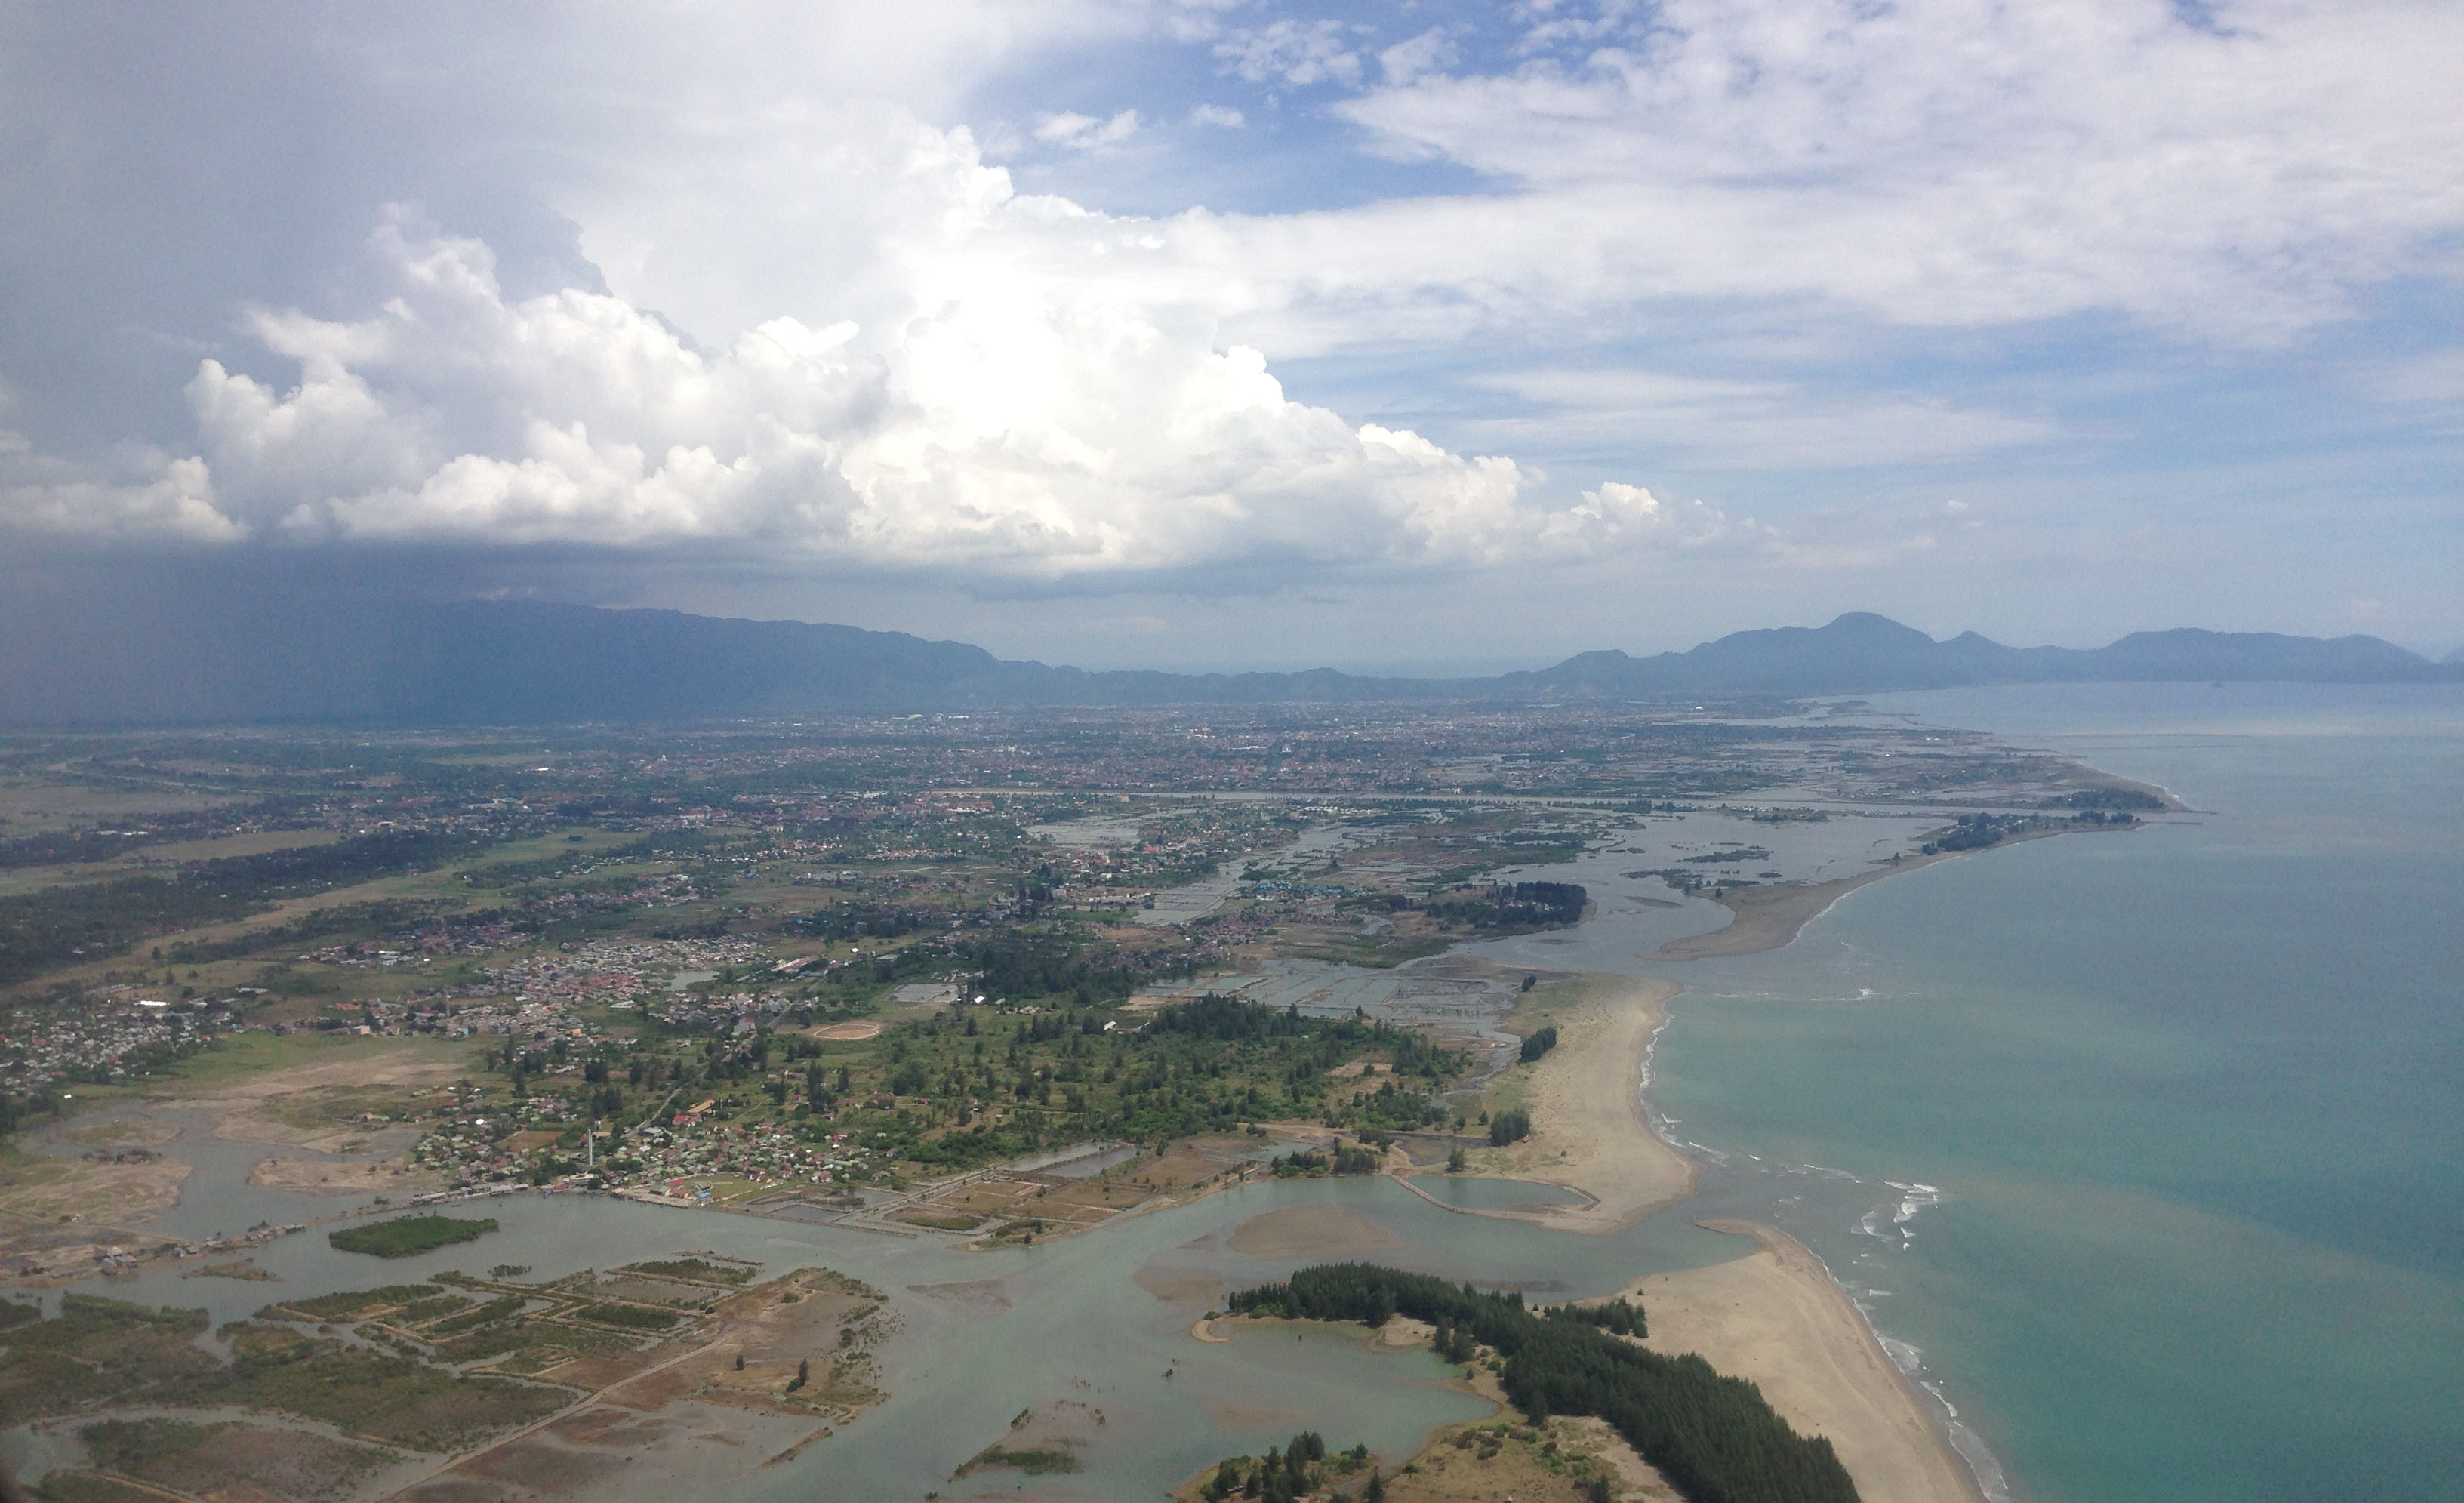 Banda Aceh and the surrounding areas after reconstruction. The 2004 tsunami reached ~3 kilometres inland across the low-lying terrain. After this, the international reconstruction effort rebuilt mostly in-place in areas near the coast (Source: Jamie McCaughey/EOS)